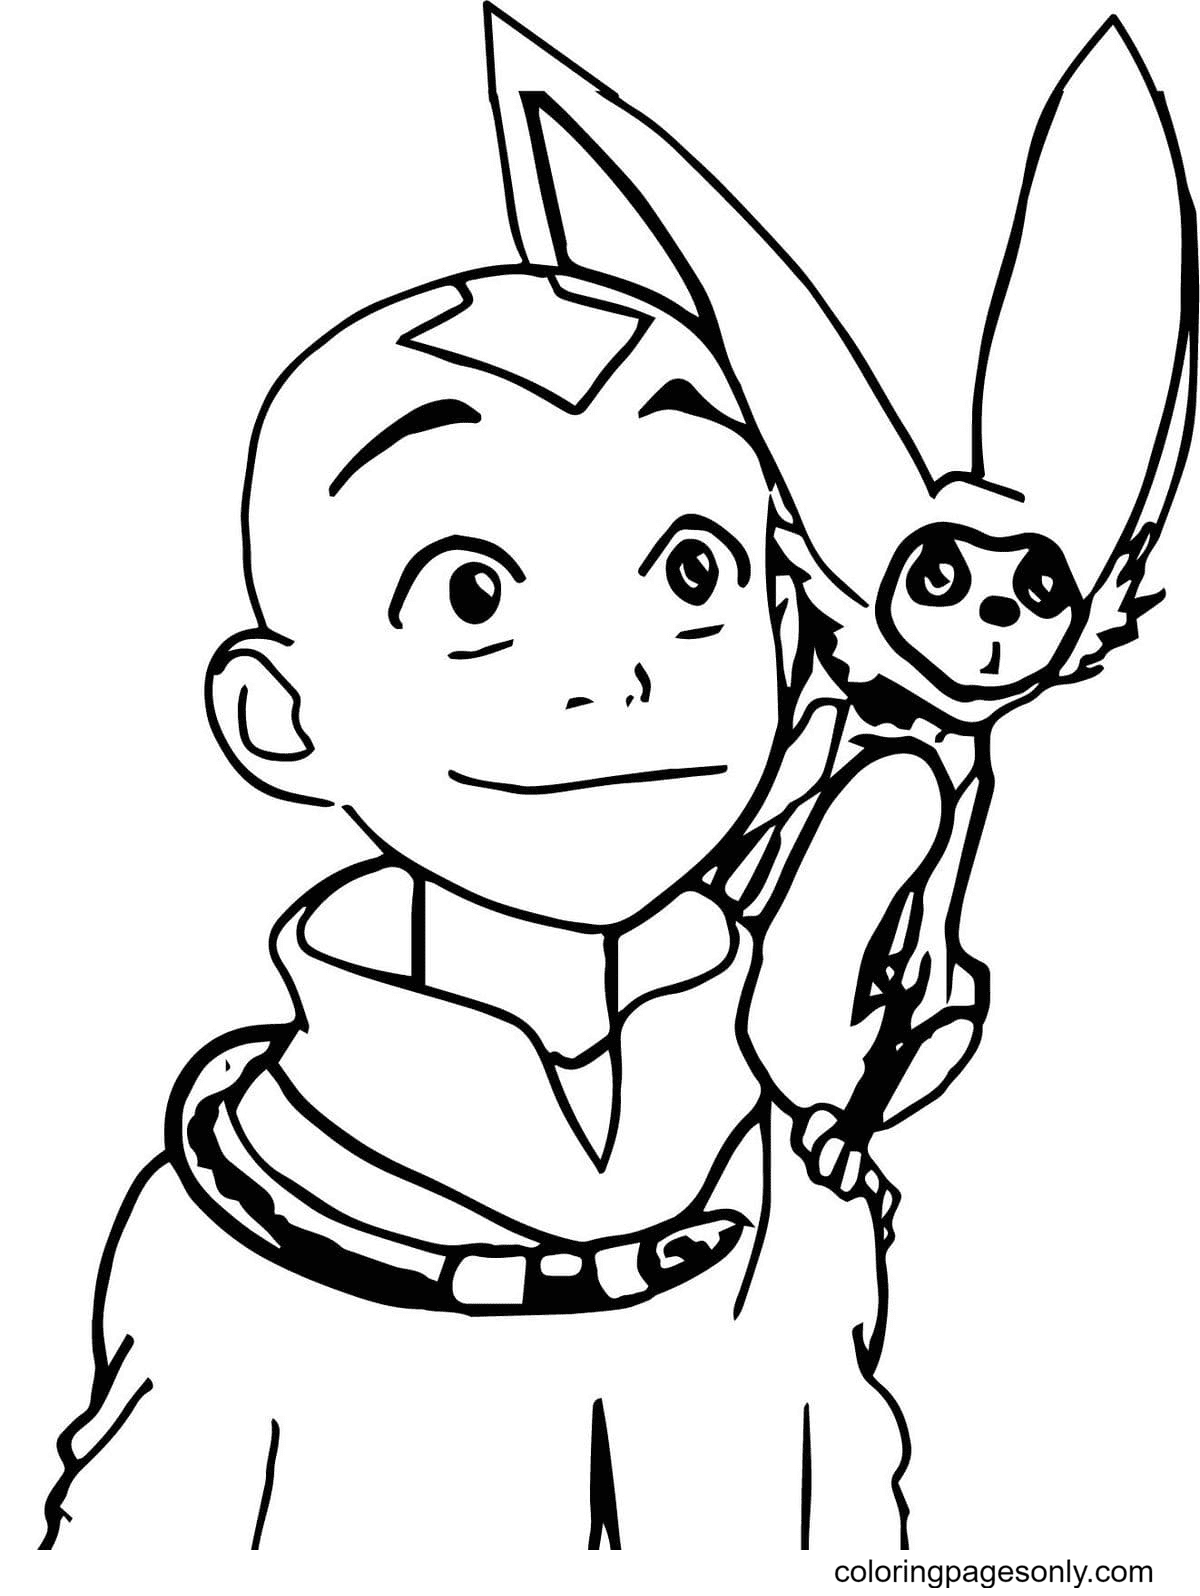 Aang with Momo from Avatar